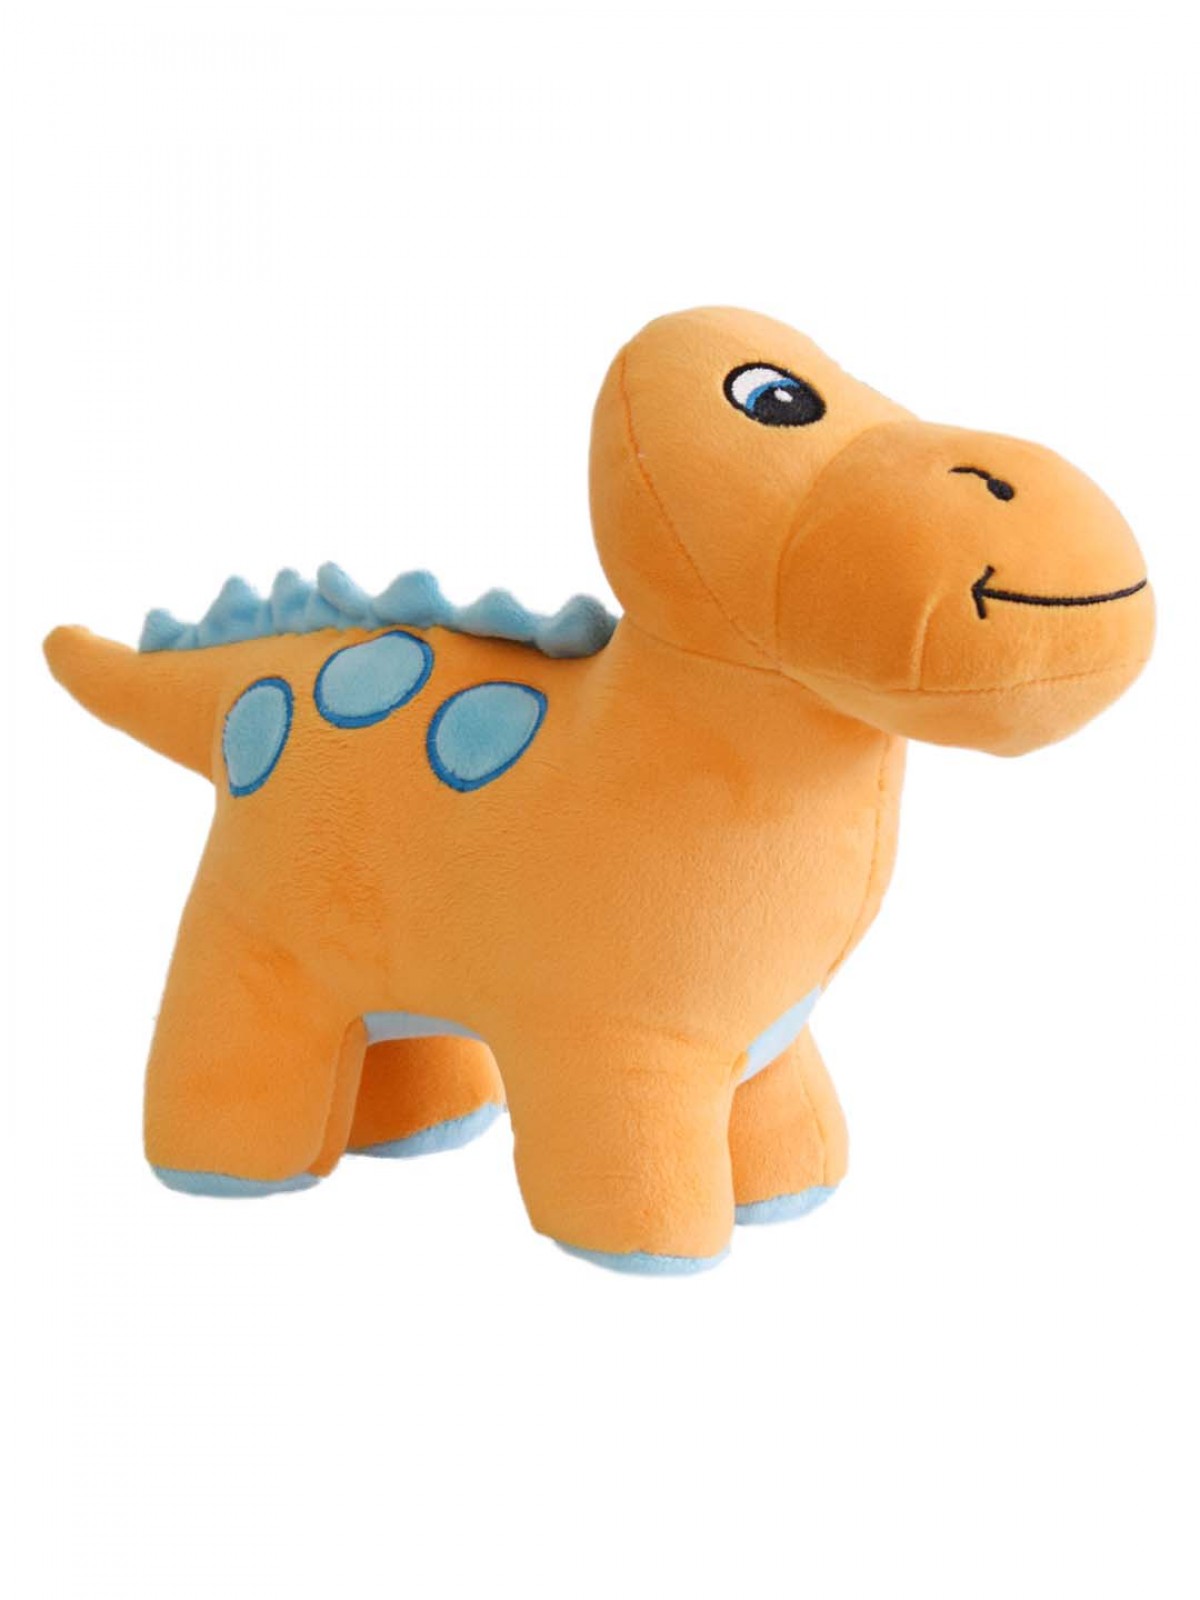 Adorable Stuffed Plush Dinosaur By Mirada, Soft Toys For Kids Of All Ages, 3Y+, Orange, 30Cm